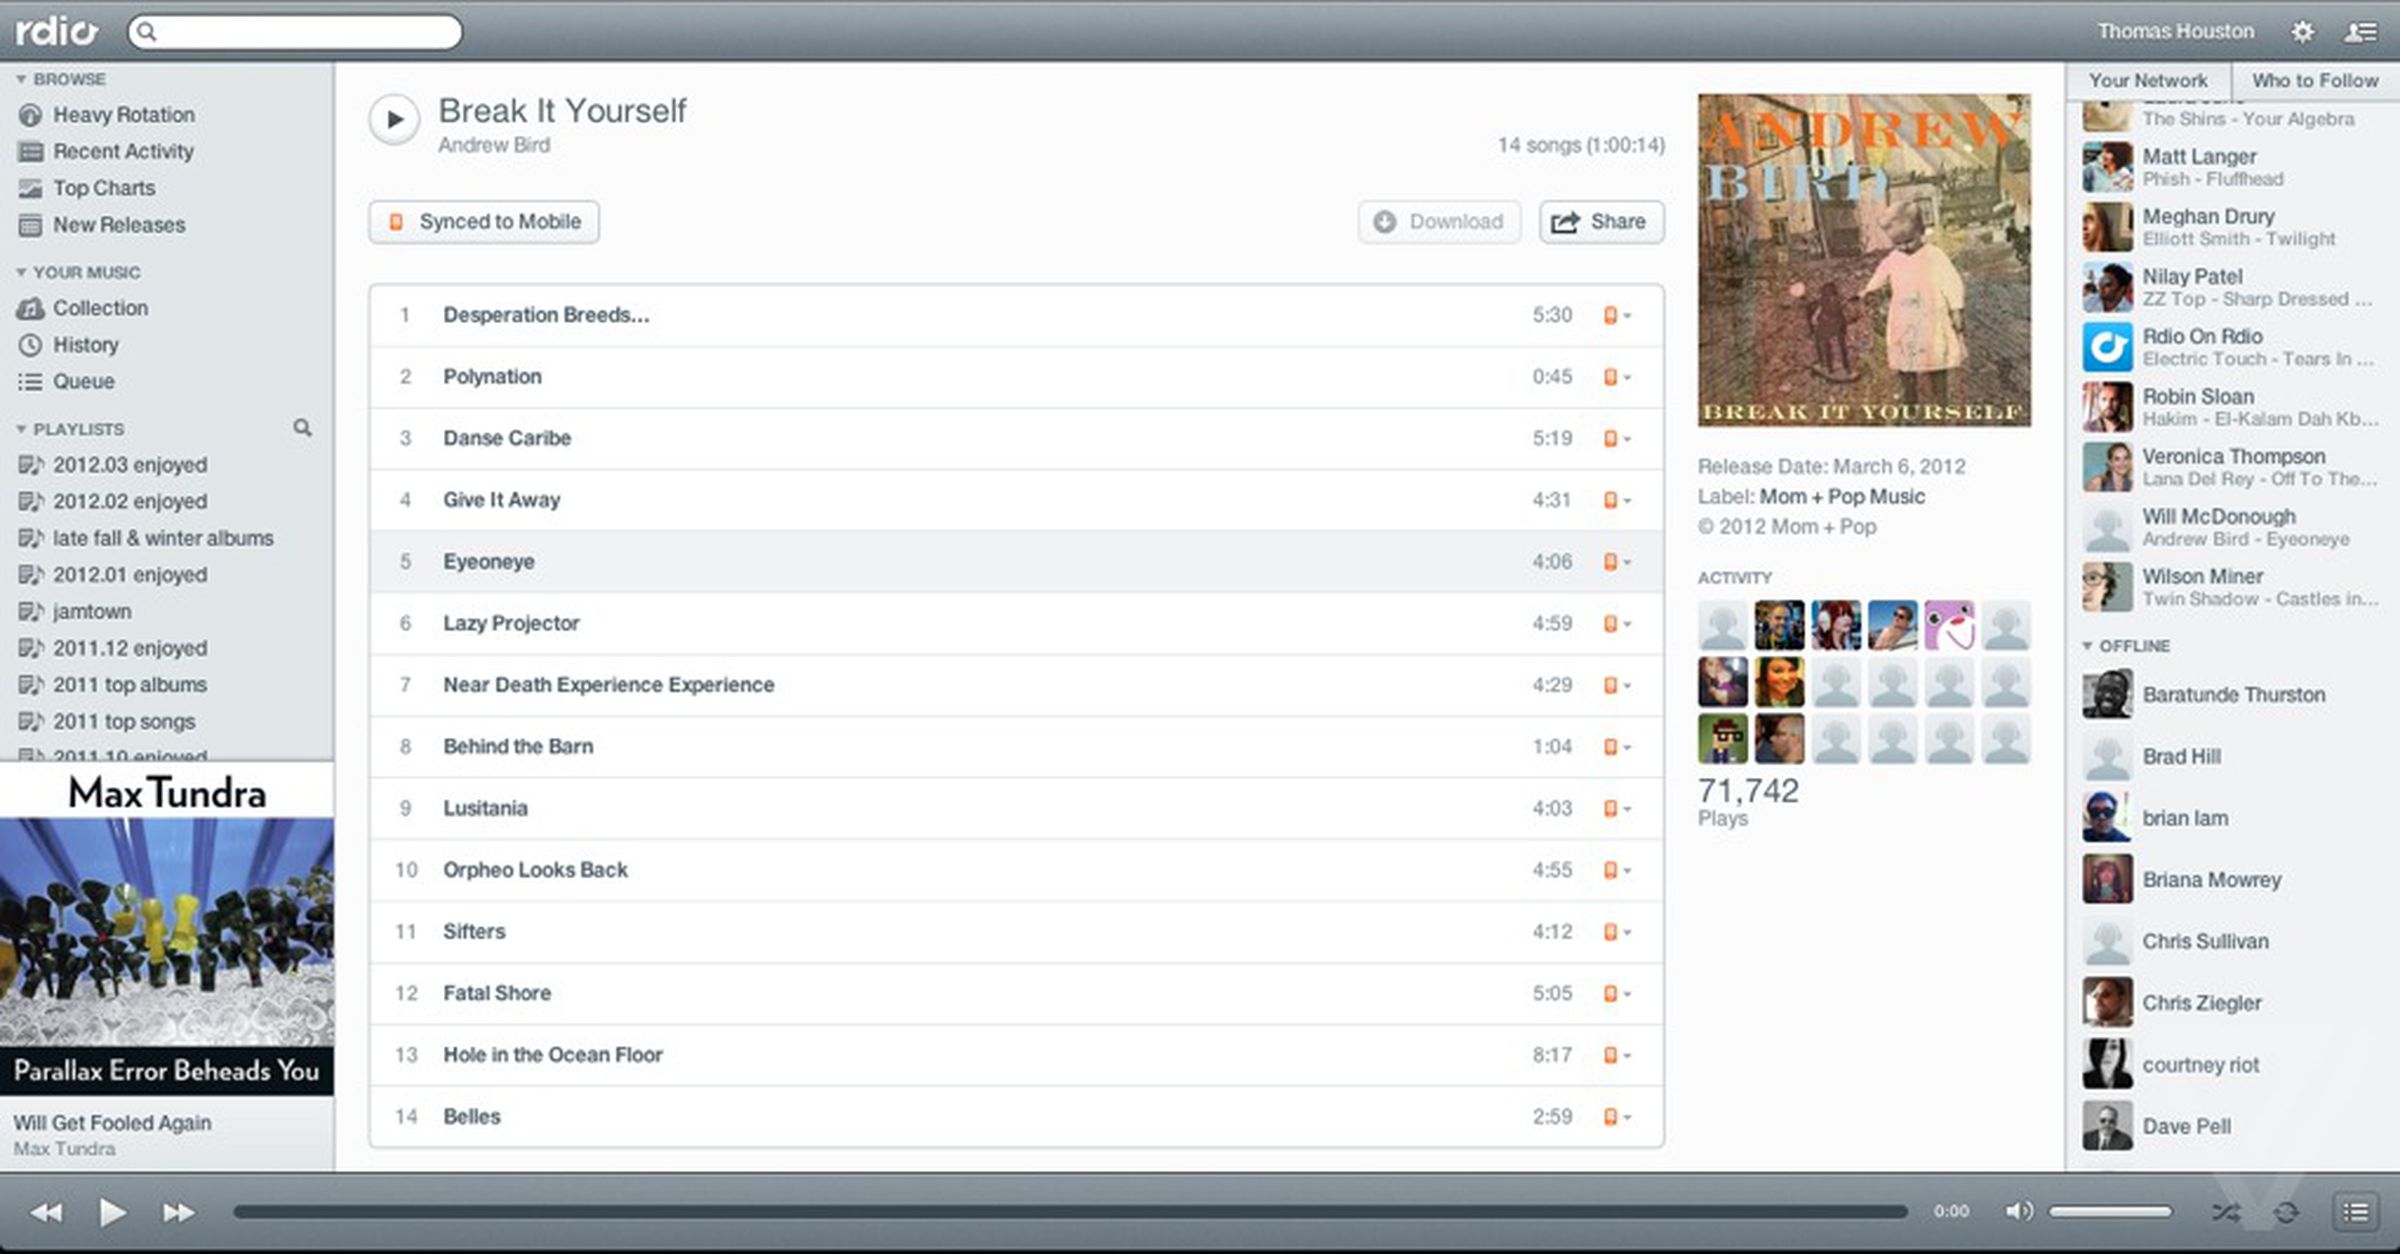 New Rdio design for web and desktop